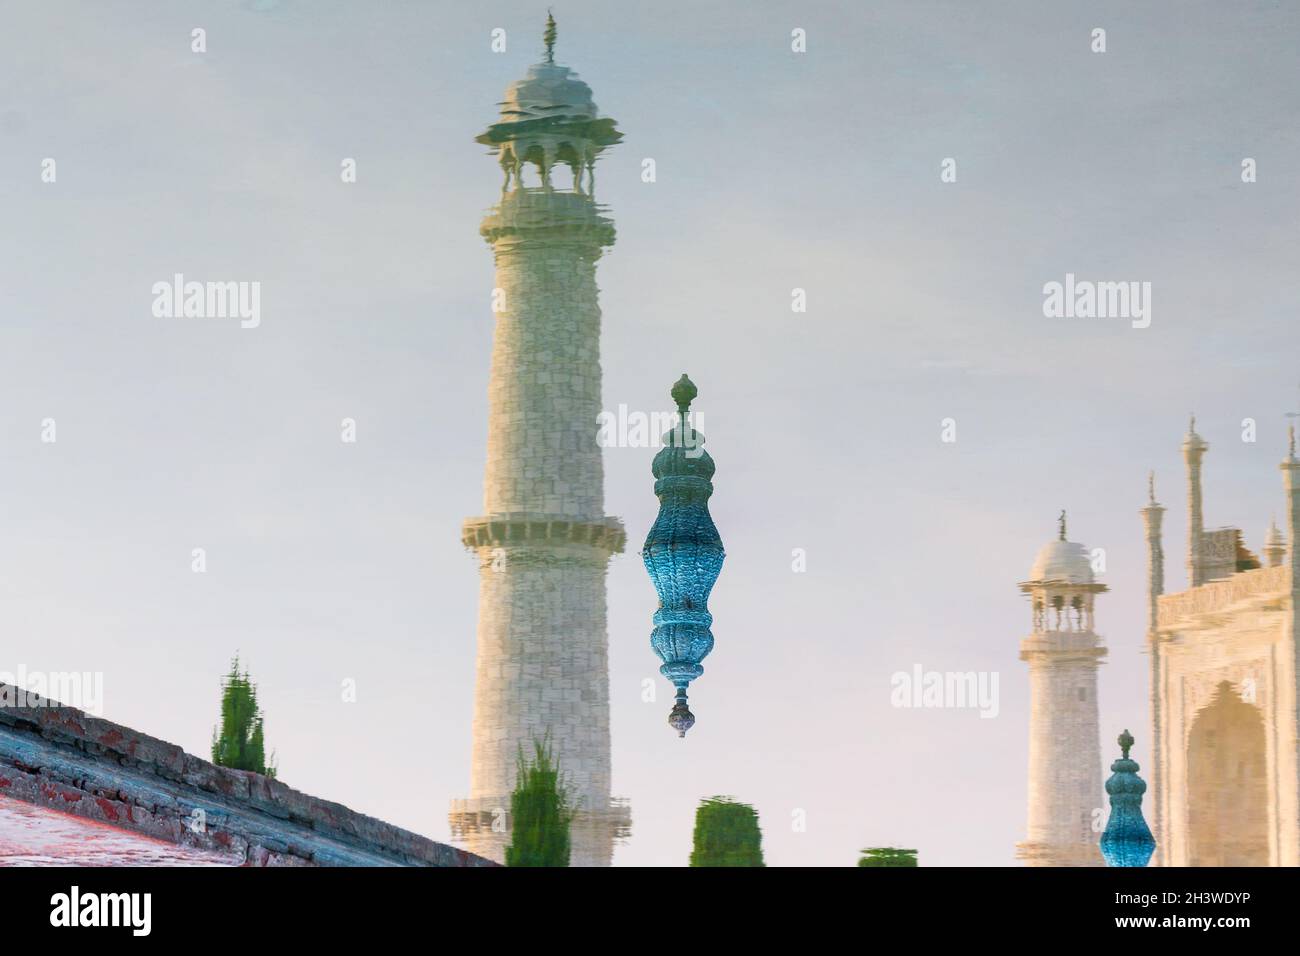 Reflection of the Taj Mahal's minarets photographed in August. This famous mausoleum has been built for Mumtaz Mahal by her husb Stock Photo